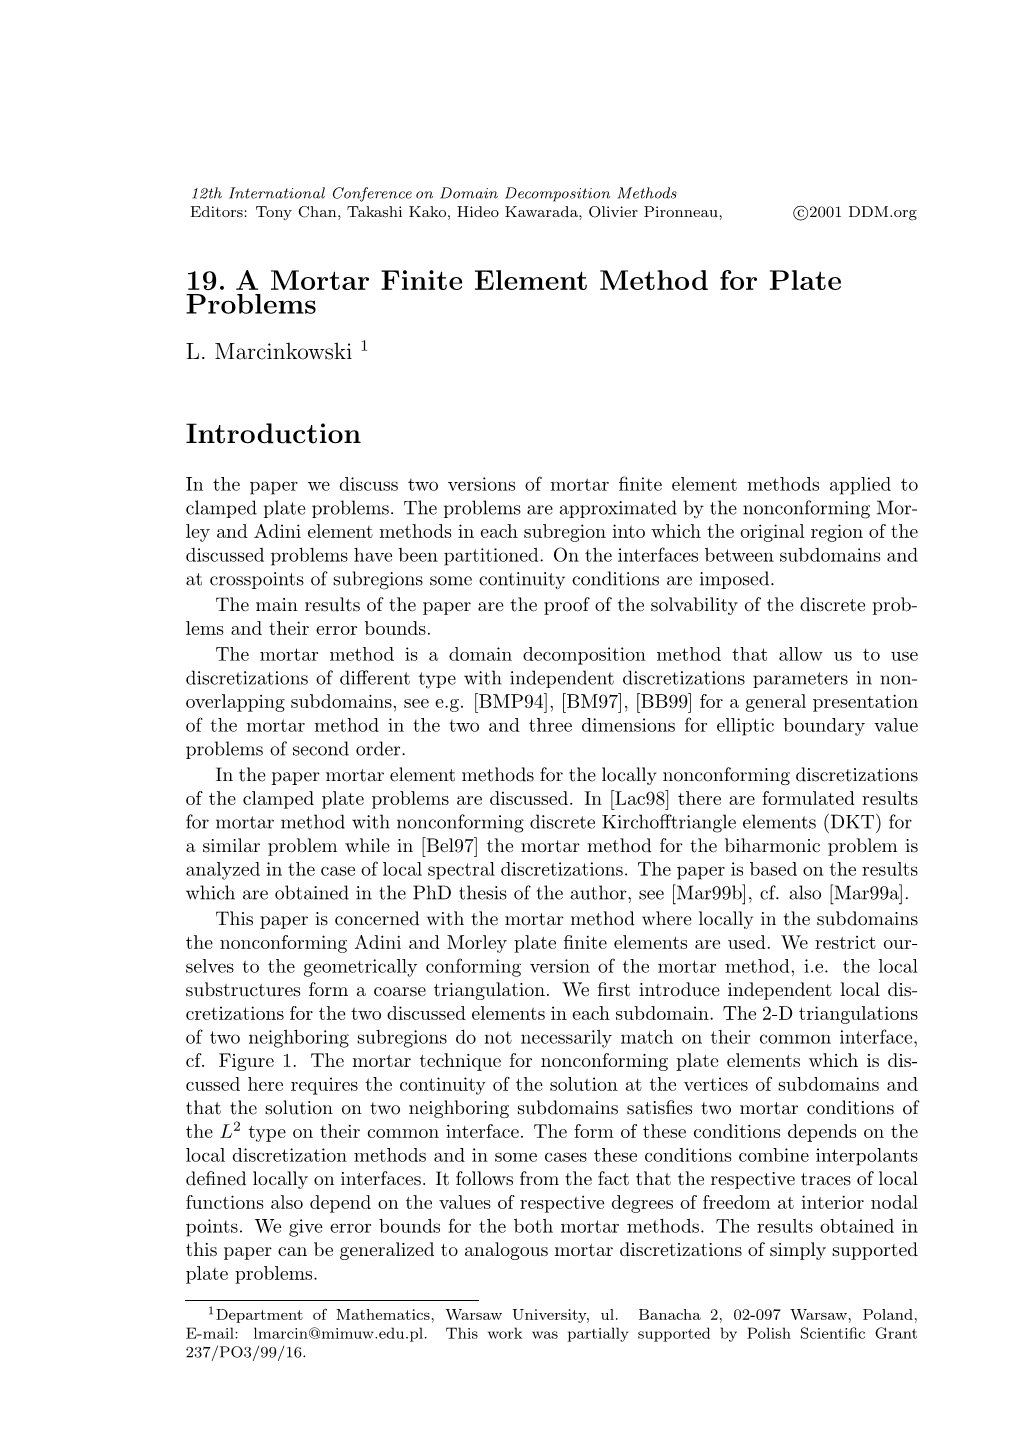 19. a Mortar Finite Element Method for Plate Problems Introduction